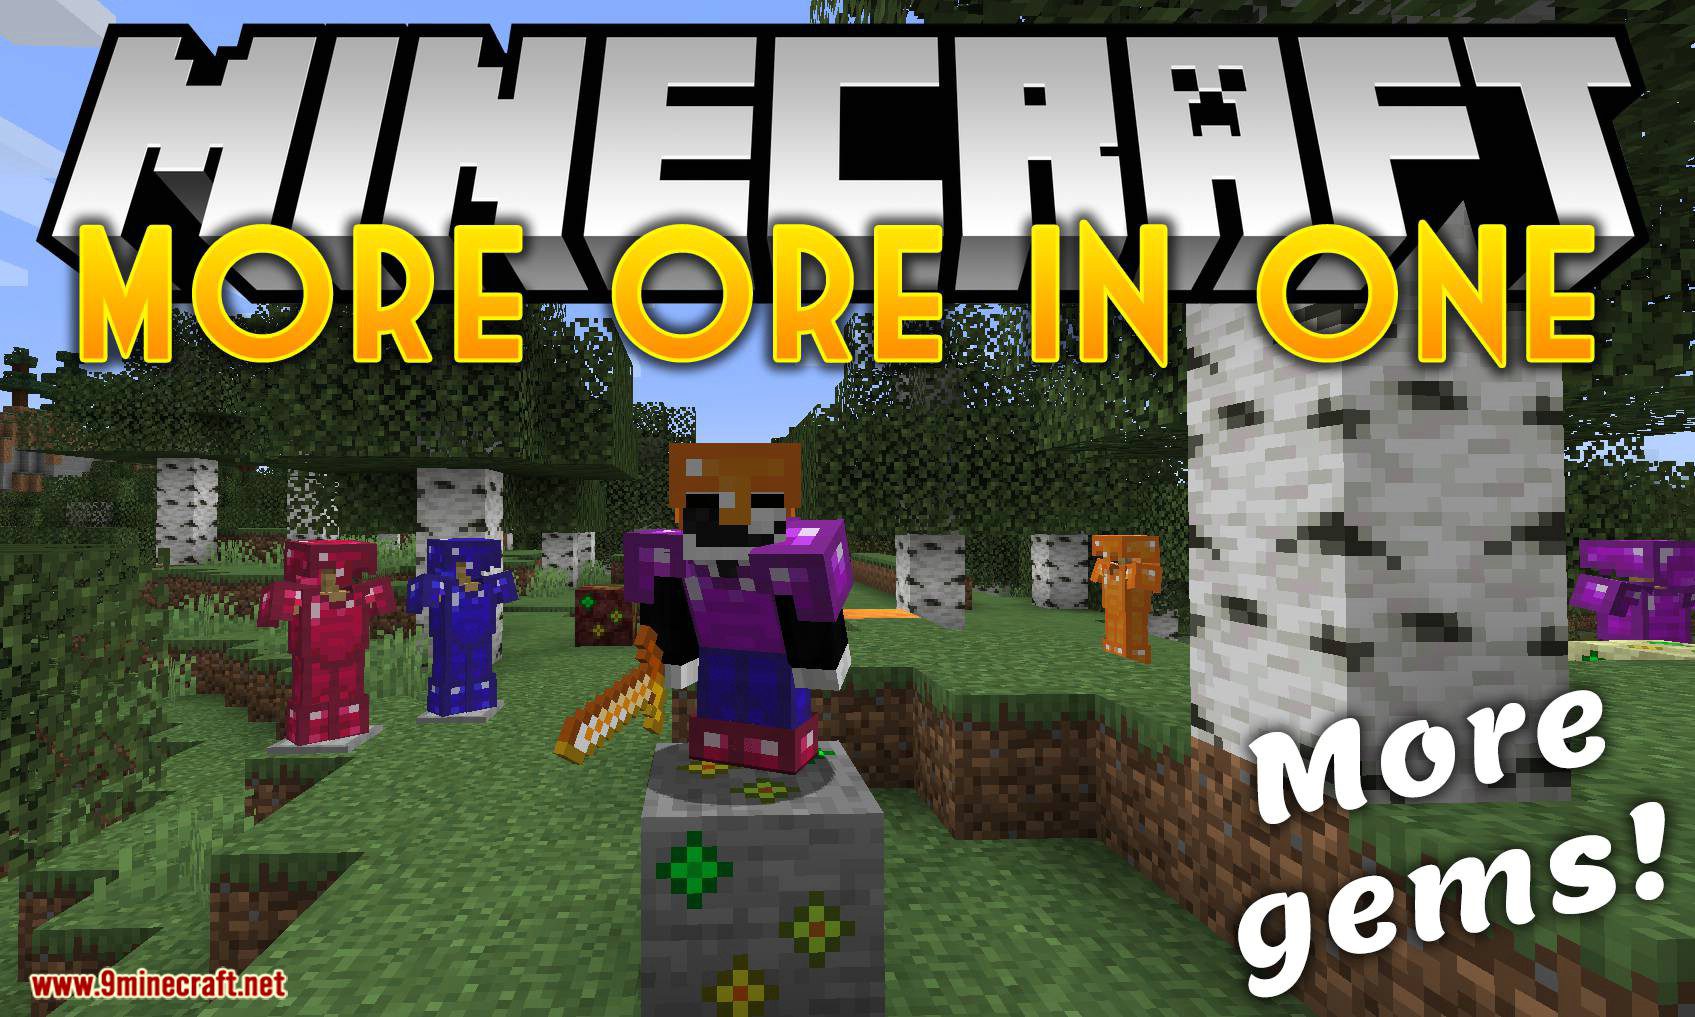 More Ores In ONE Mod (1.19.2, 1.18.2) - Ores in the Overworld, Nether, and End 1